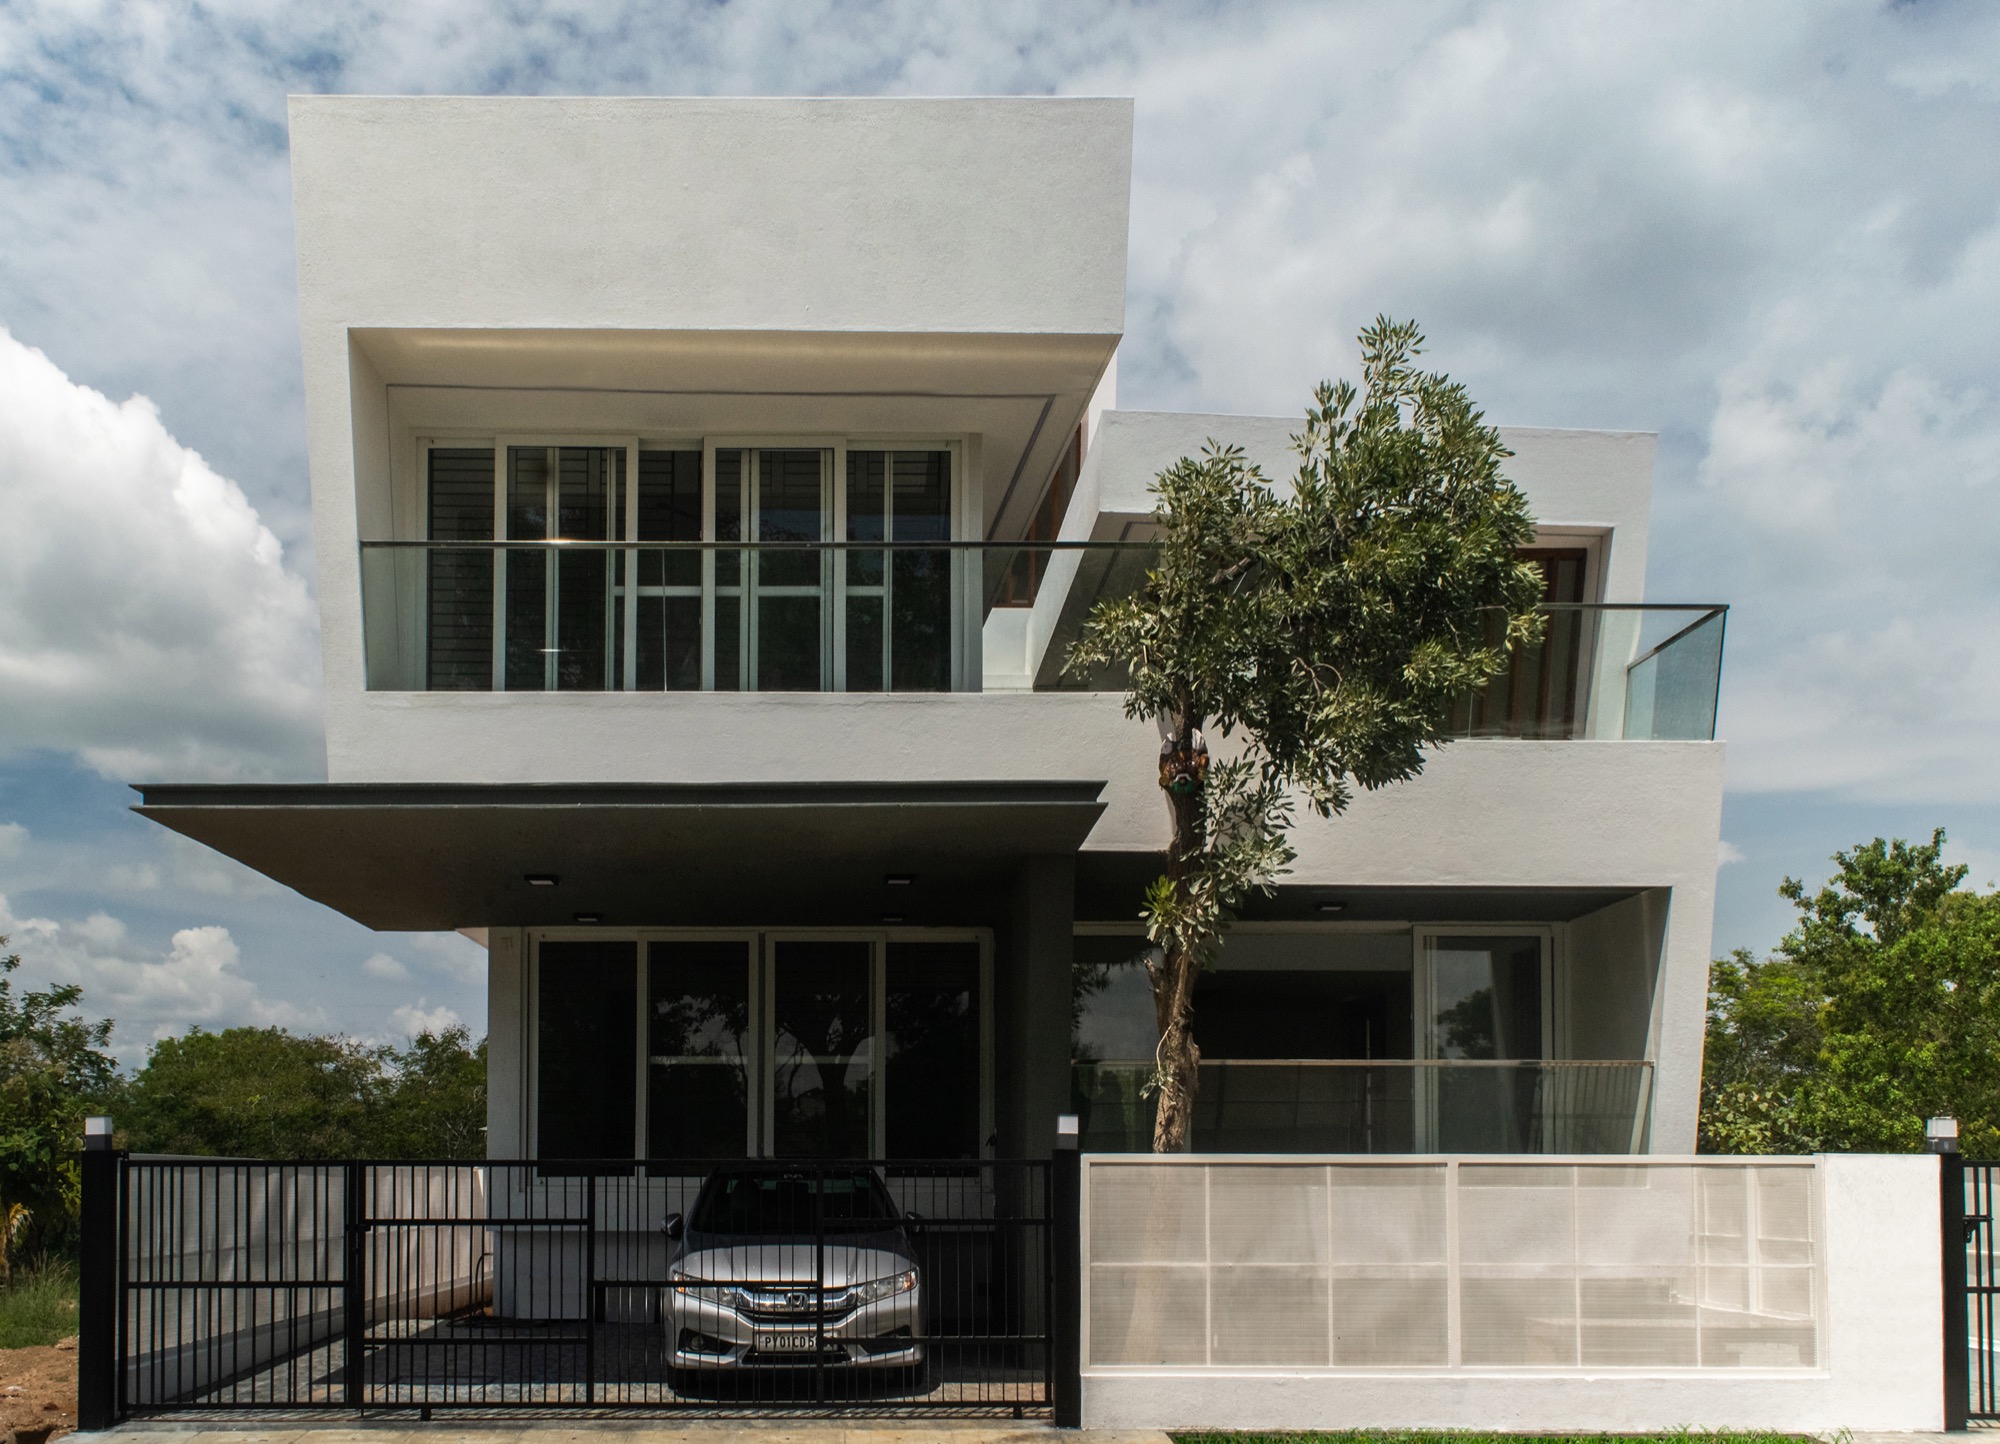 House in the Golf Course, Bengaluru, by Radical Architecture Design Consultants